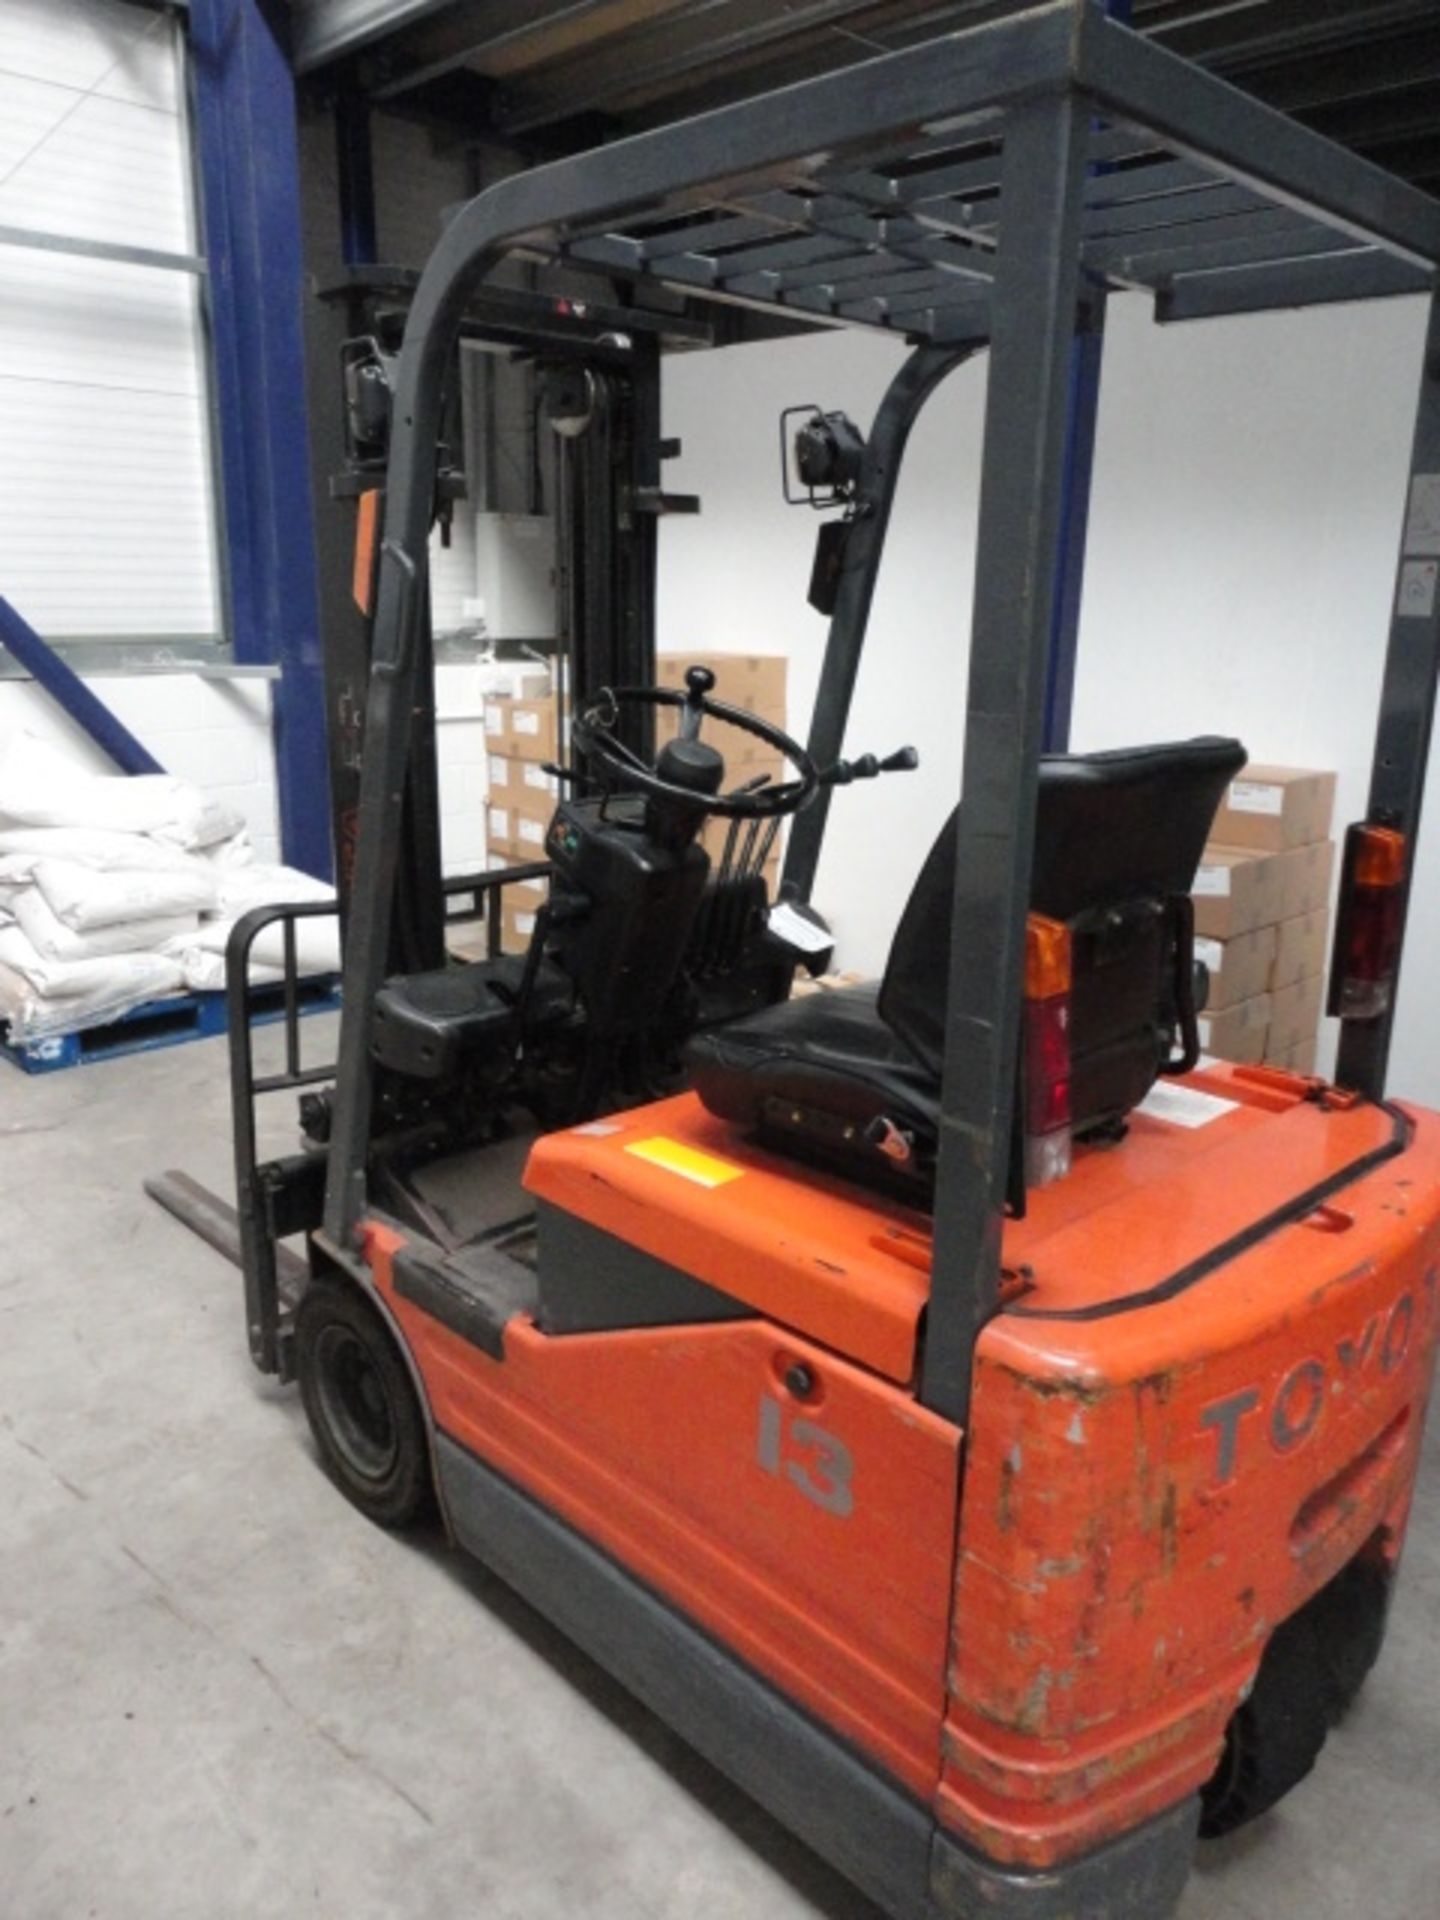 Toyota Fork Lift Truck. capable of 1.25 tonne lift. Elec, MUST BE THE LAST LOT TO LEAVE LIFT OUT £50 - Image 4 of 5